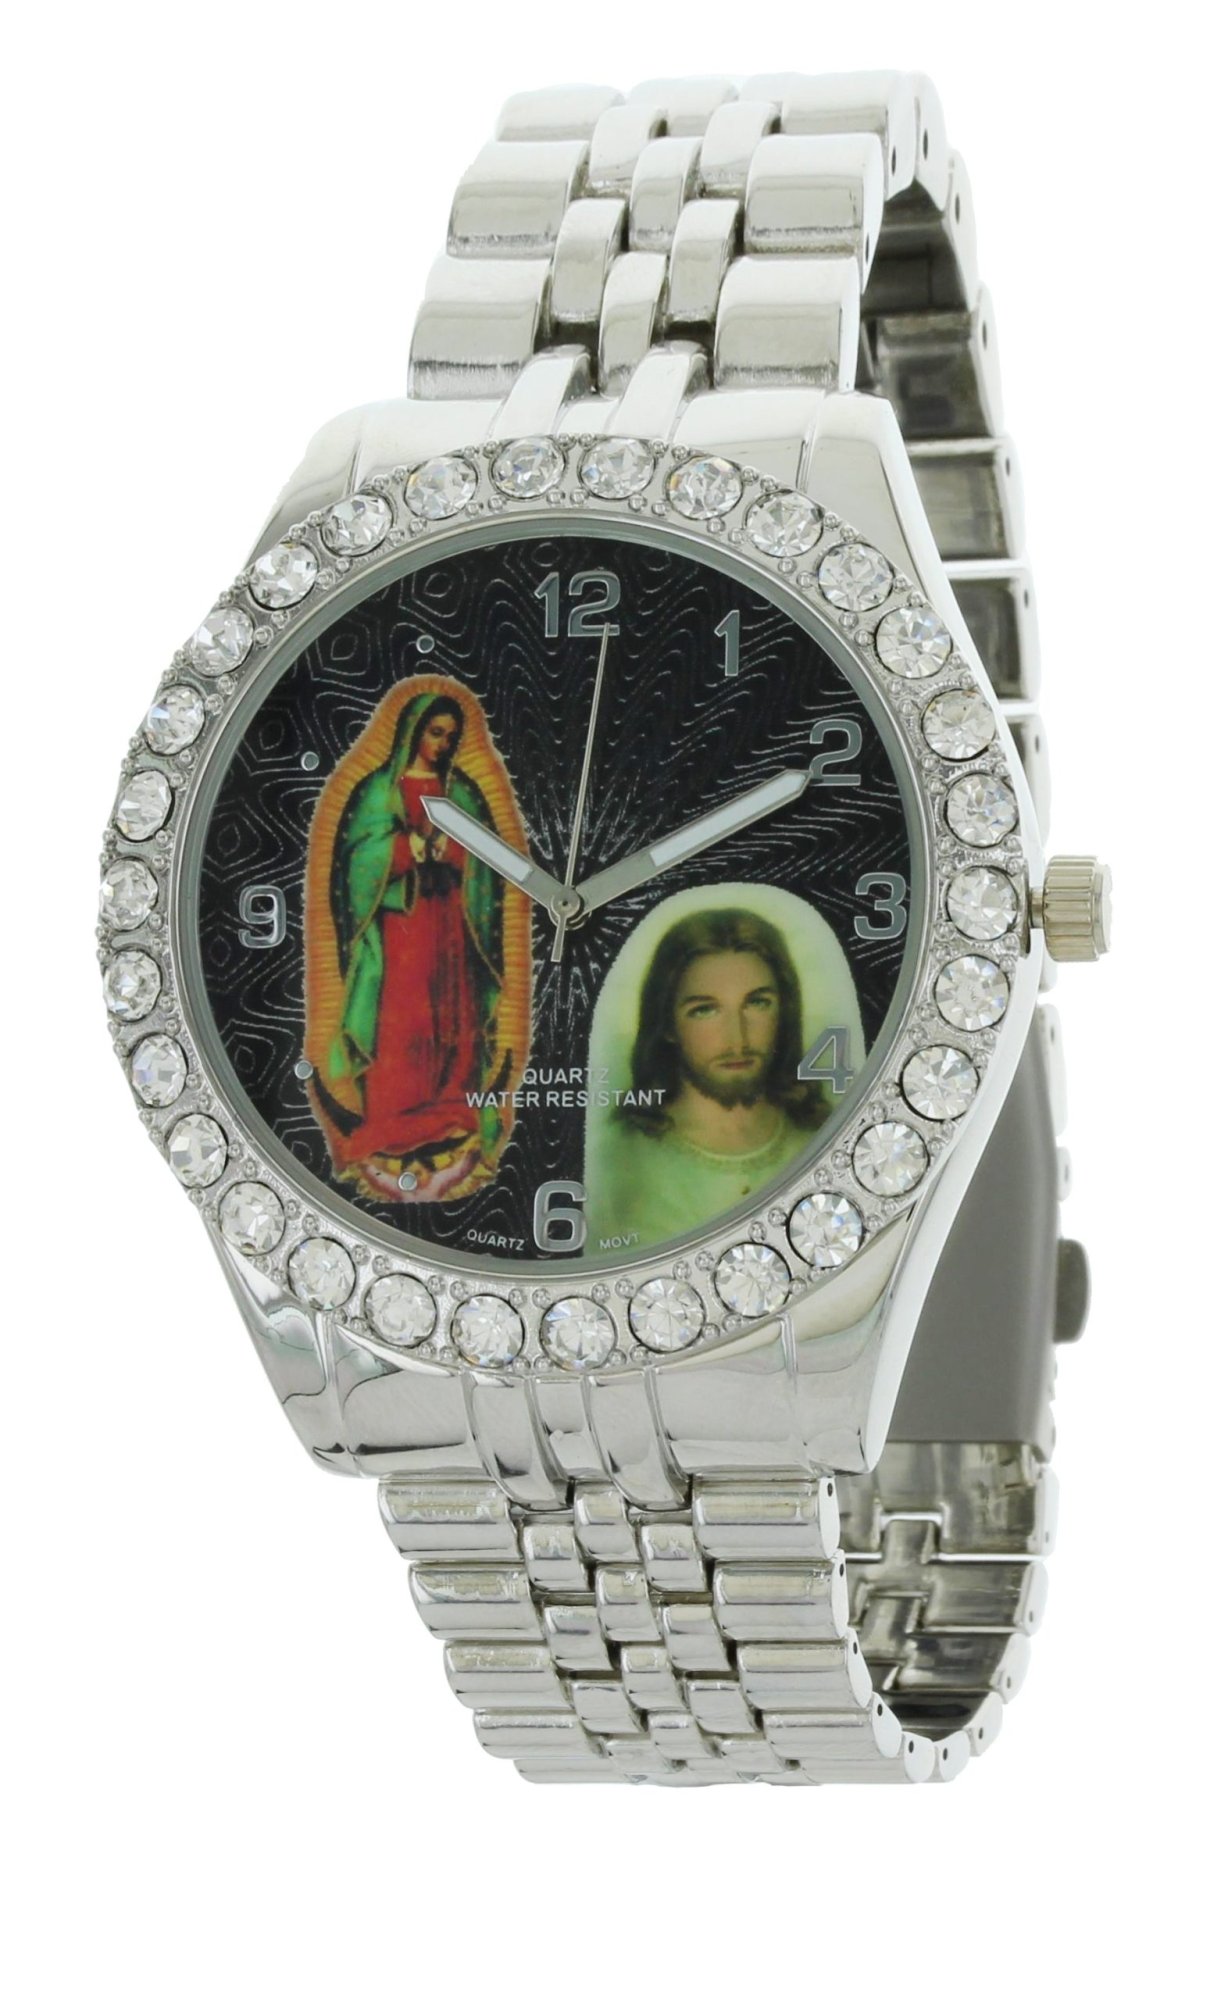 Model: Our Lady of Guadalupe and Jesus Silver-Tone Metal Bracelet Watch with Neckless and Cross Pendent Set